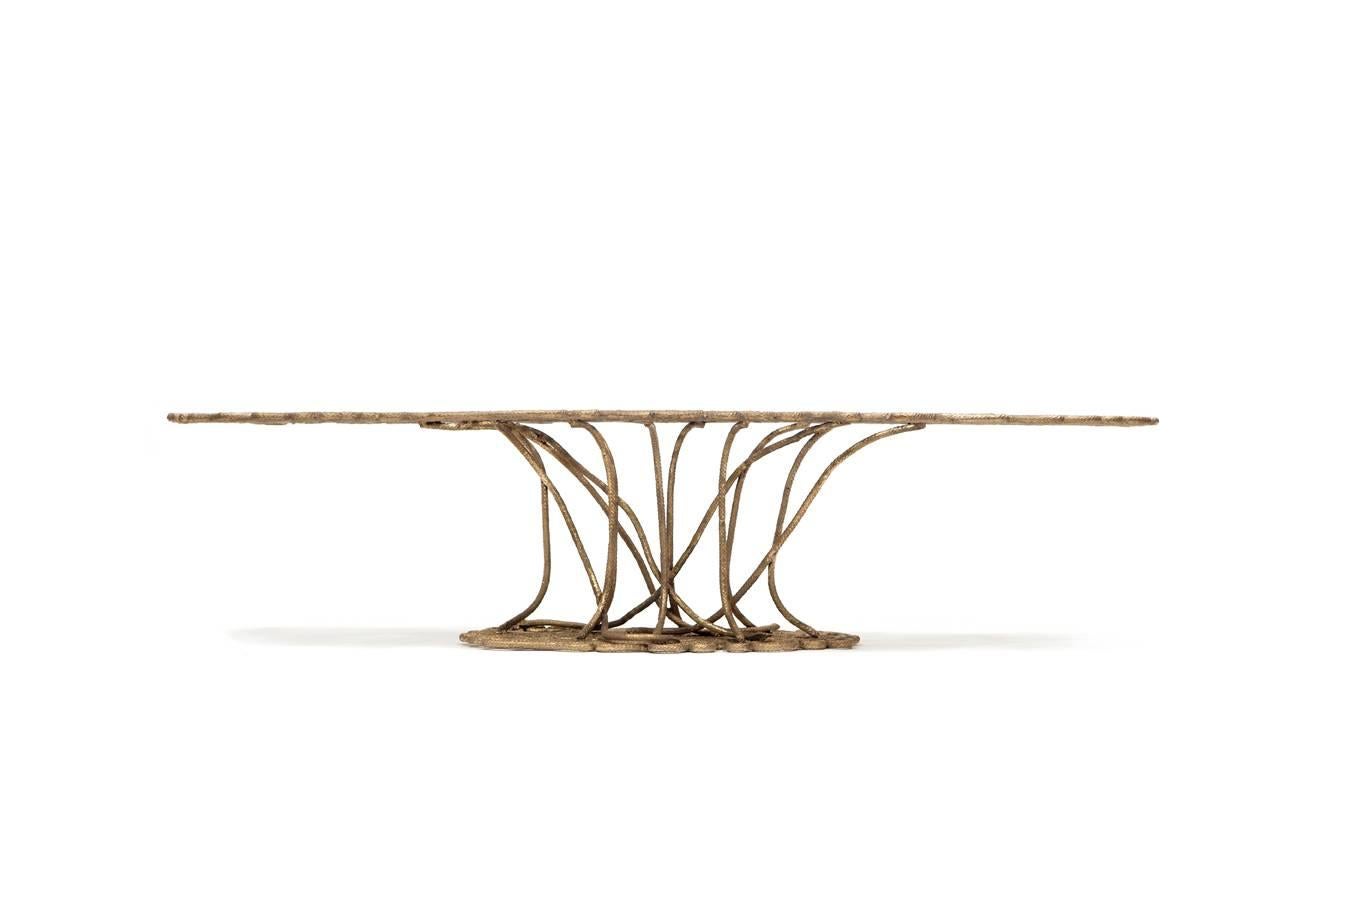 Ofidia Center Table, 2015
Cast bronze
13.78 x 57.09 x 29.53 inches
35 x 145 x 75 cm
Signed and numbered

The Brazilian designers Fernando and Humberto Campana created this bronze coffee table, cast to look like rope.

The Campana Brothers, Fernando